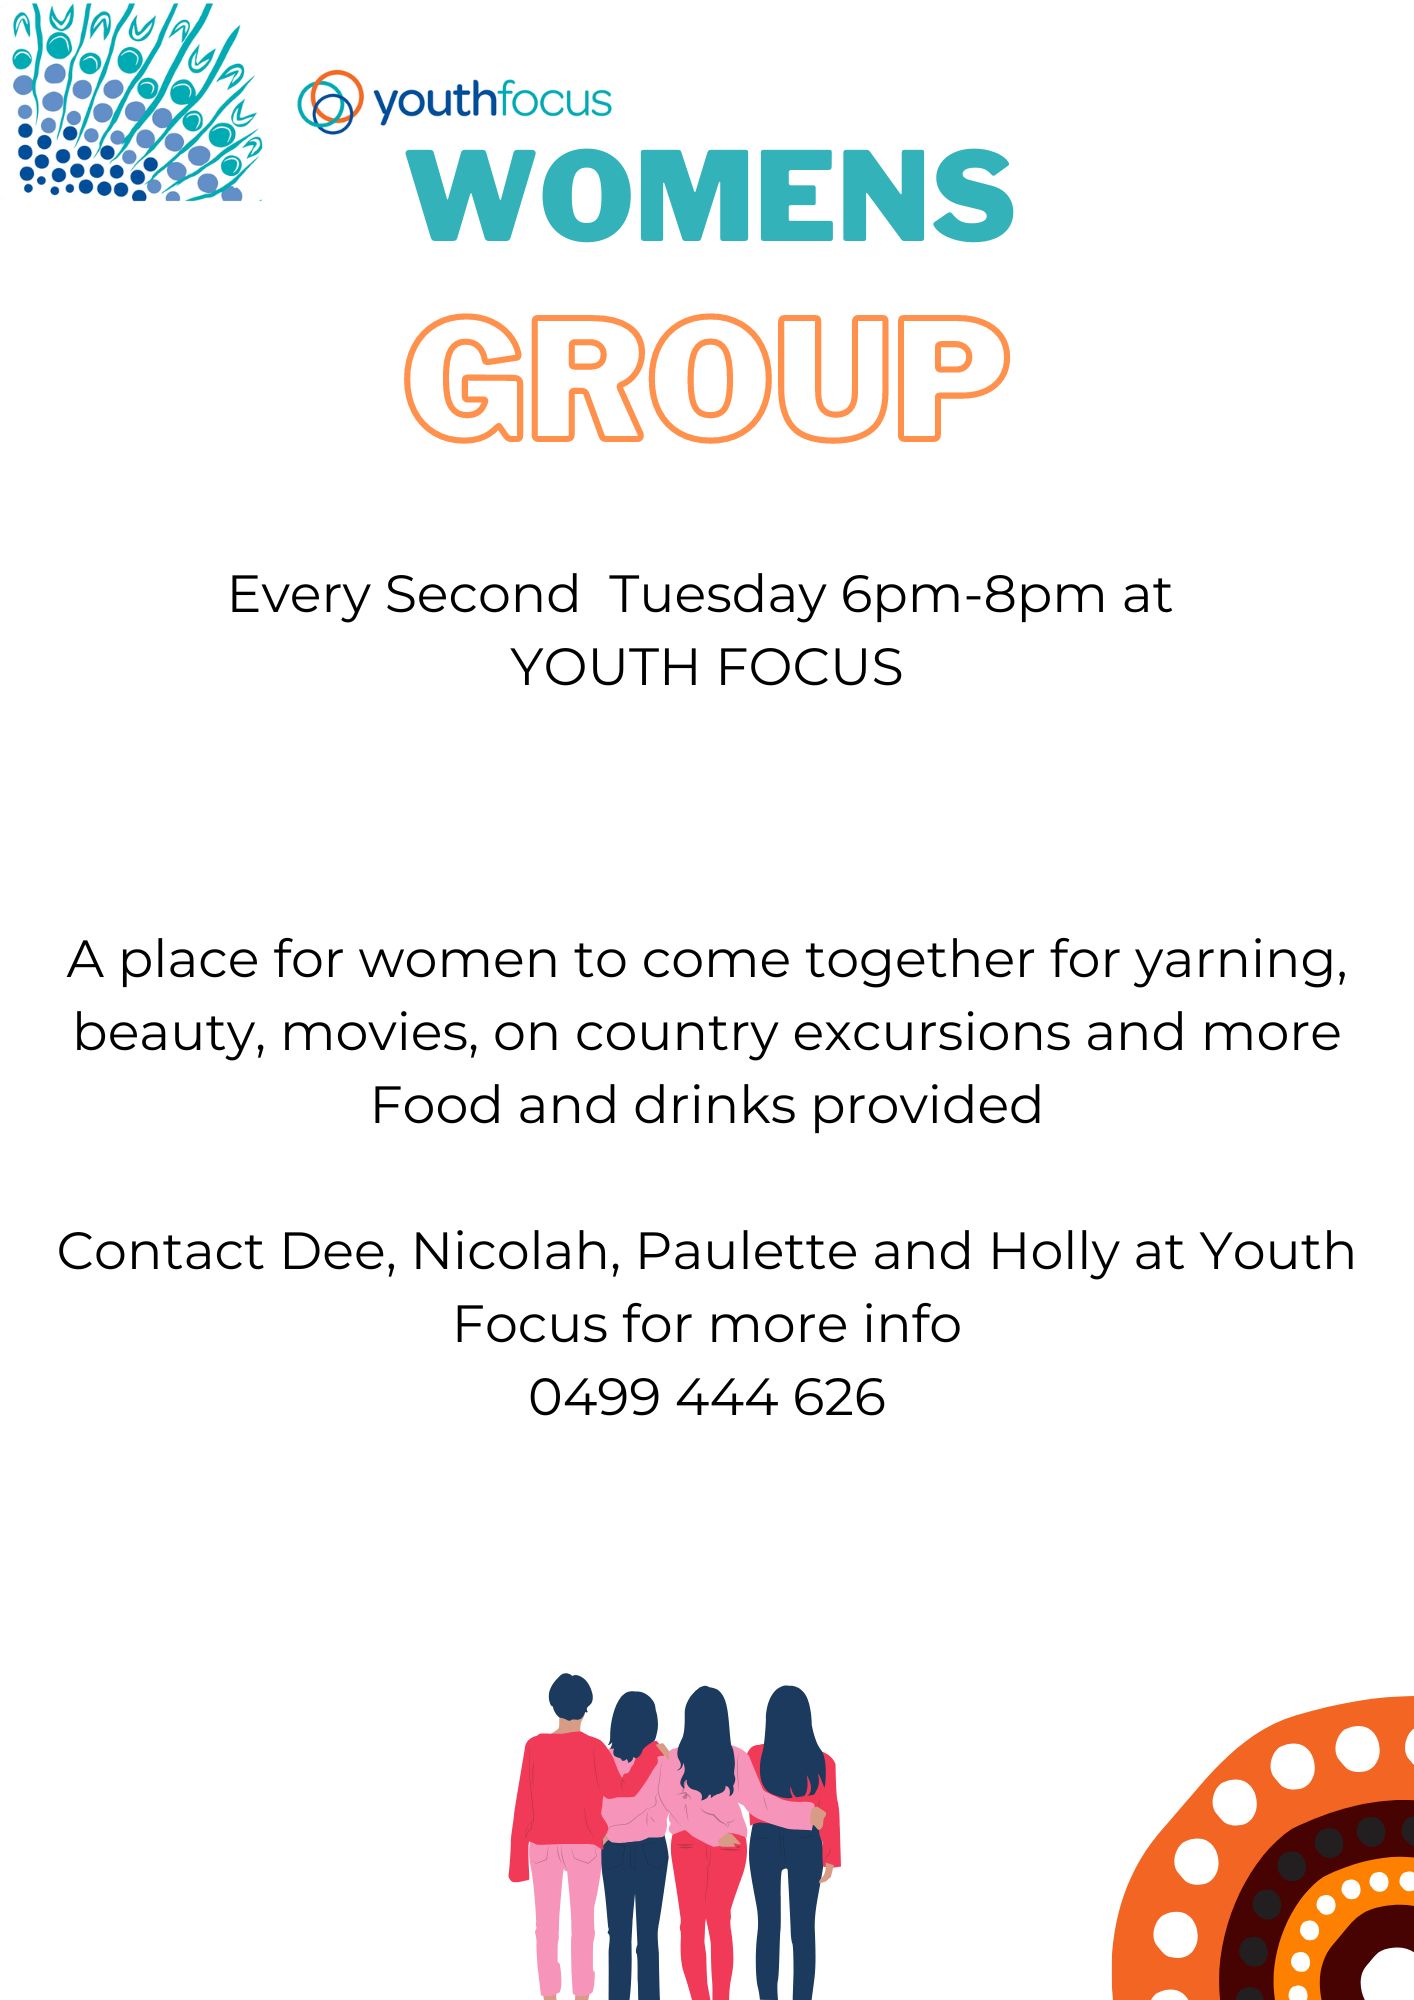 Youth Focus Women's Group